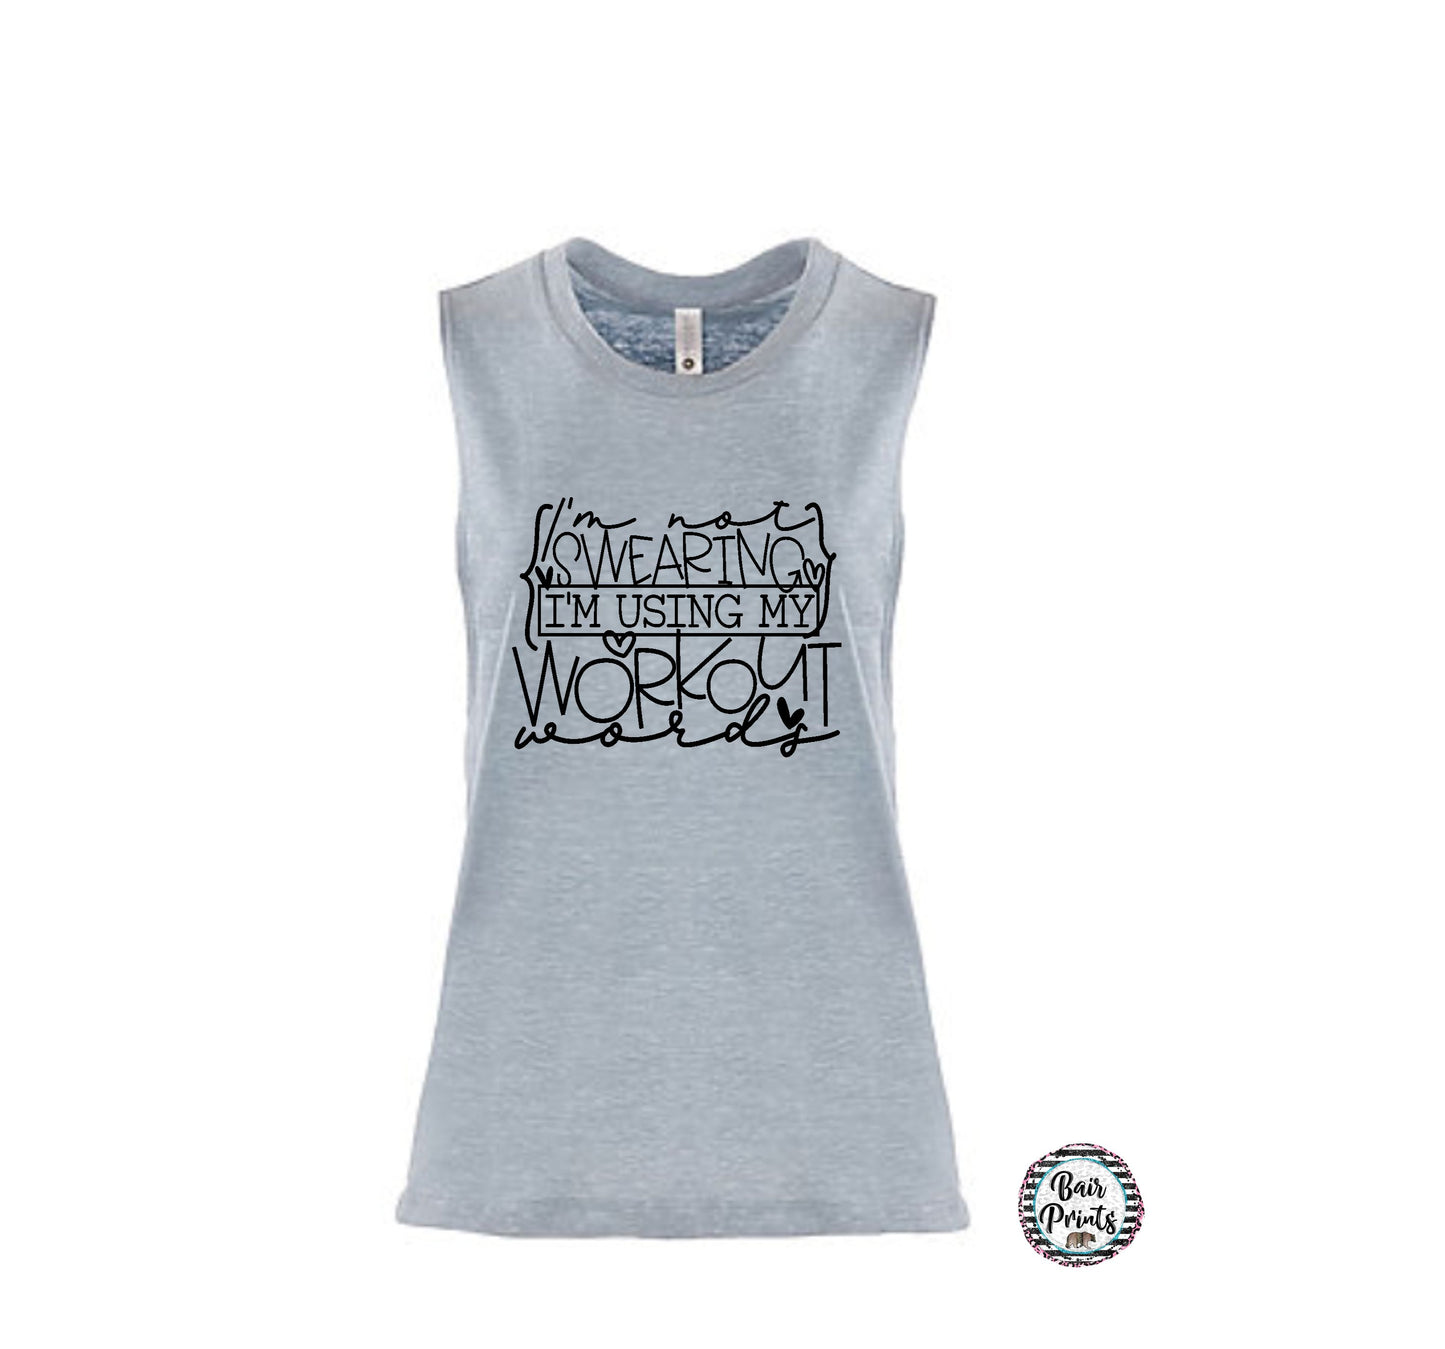 I'm Not Swearing, I am Using My Workout Words. Muscle Tank